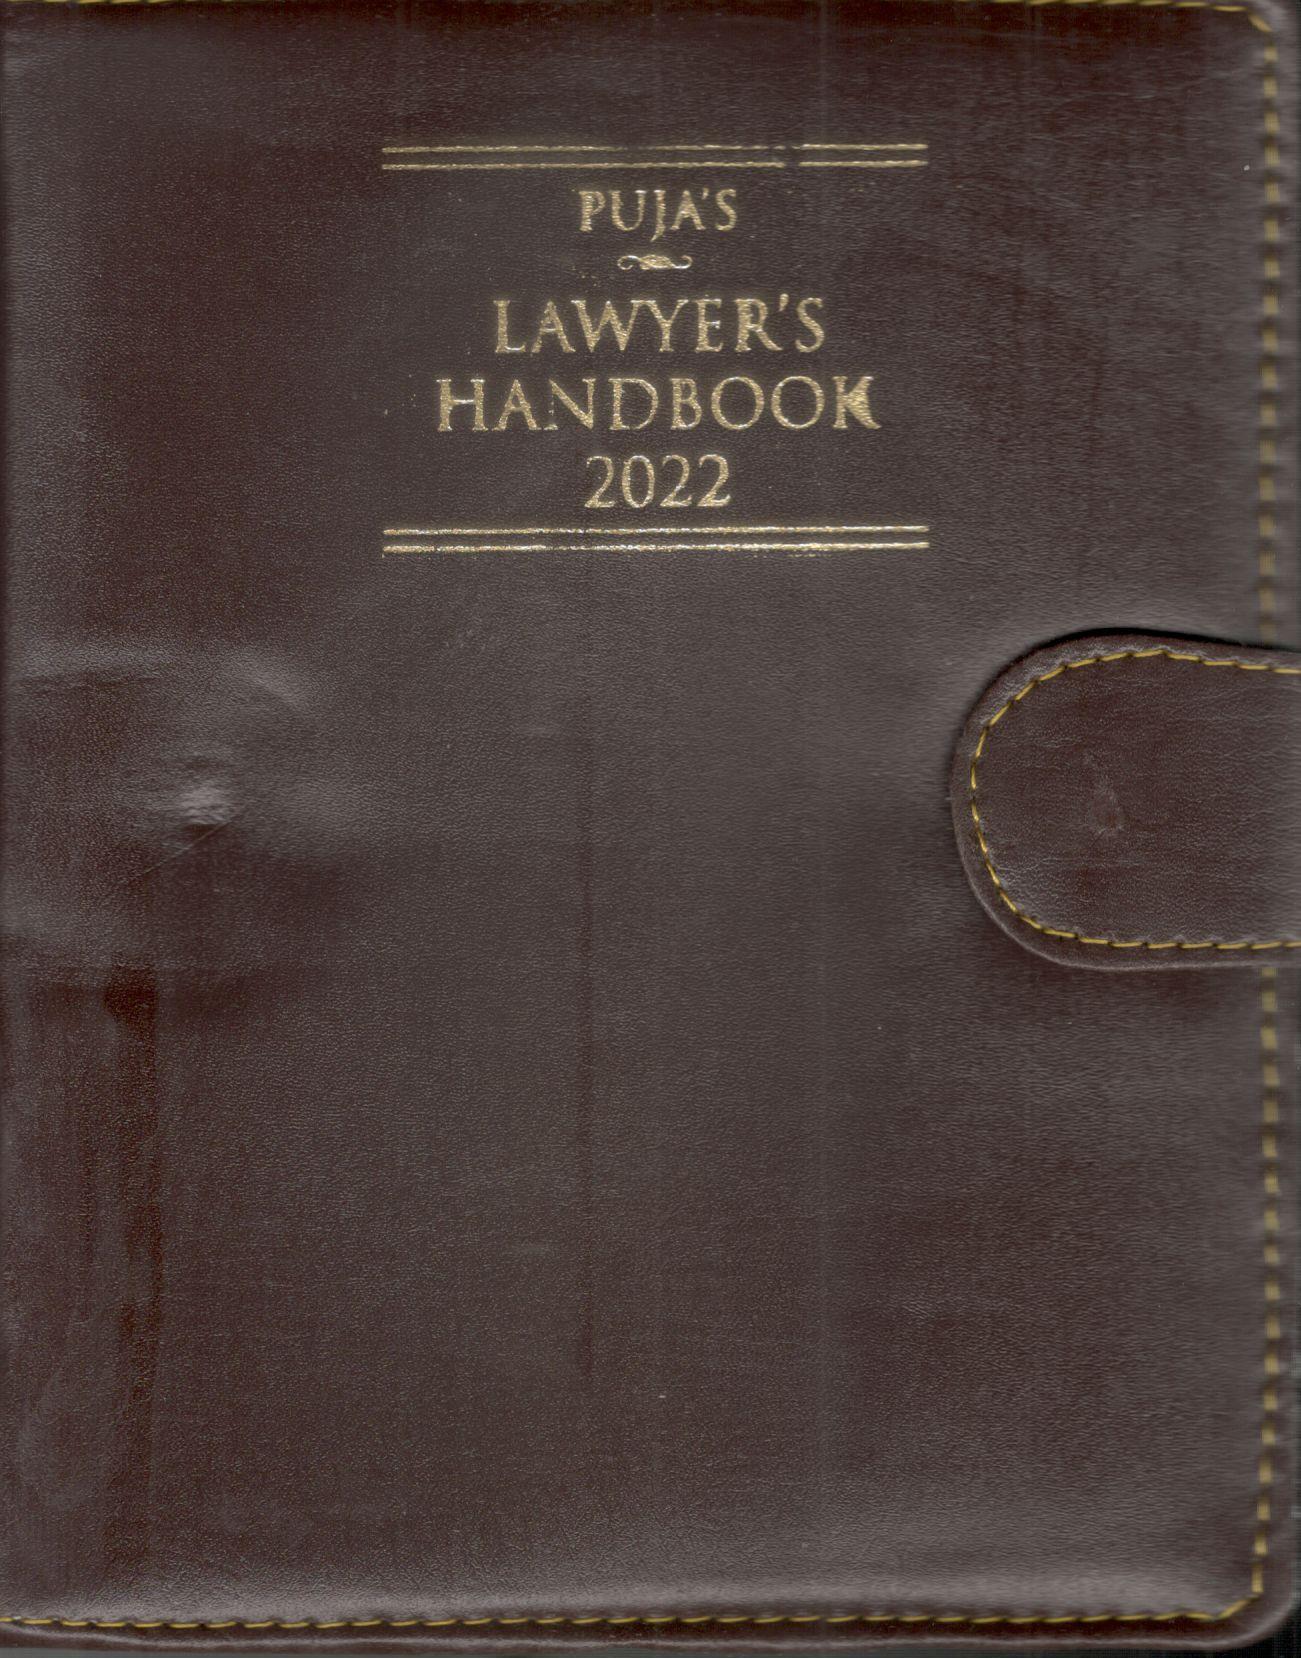  Buy Puja’s Lawyer’s Handbook 2022 - Brown Executive small Size with Button